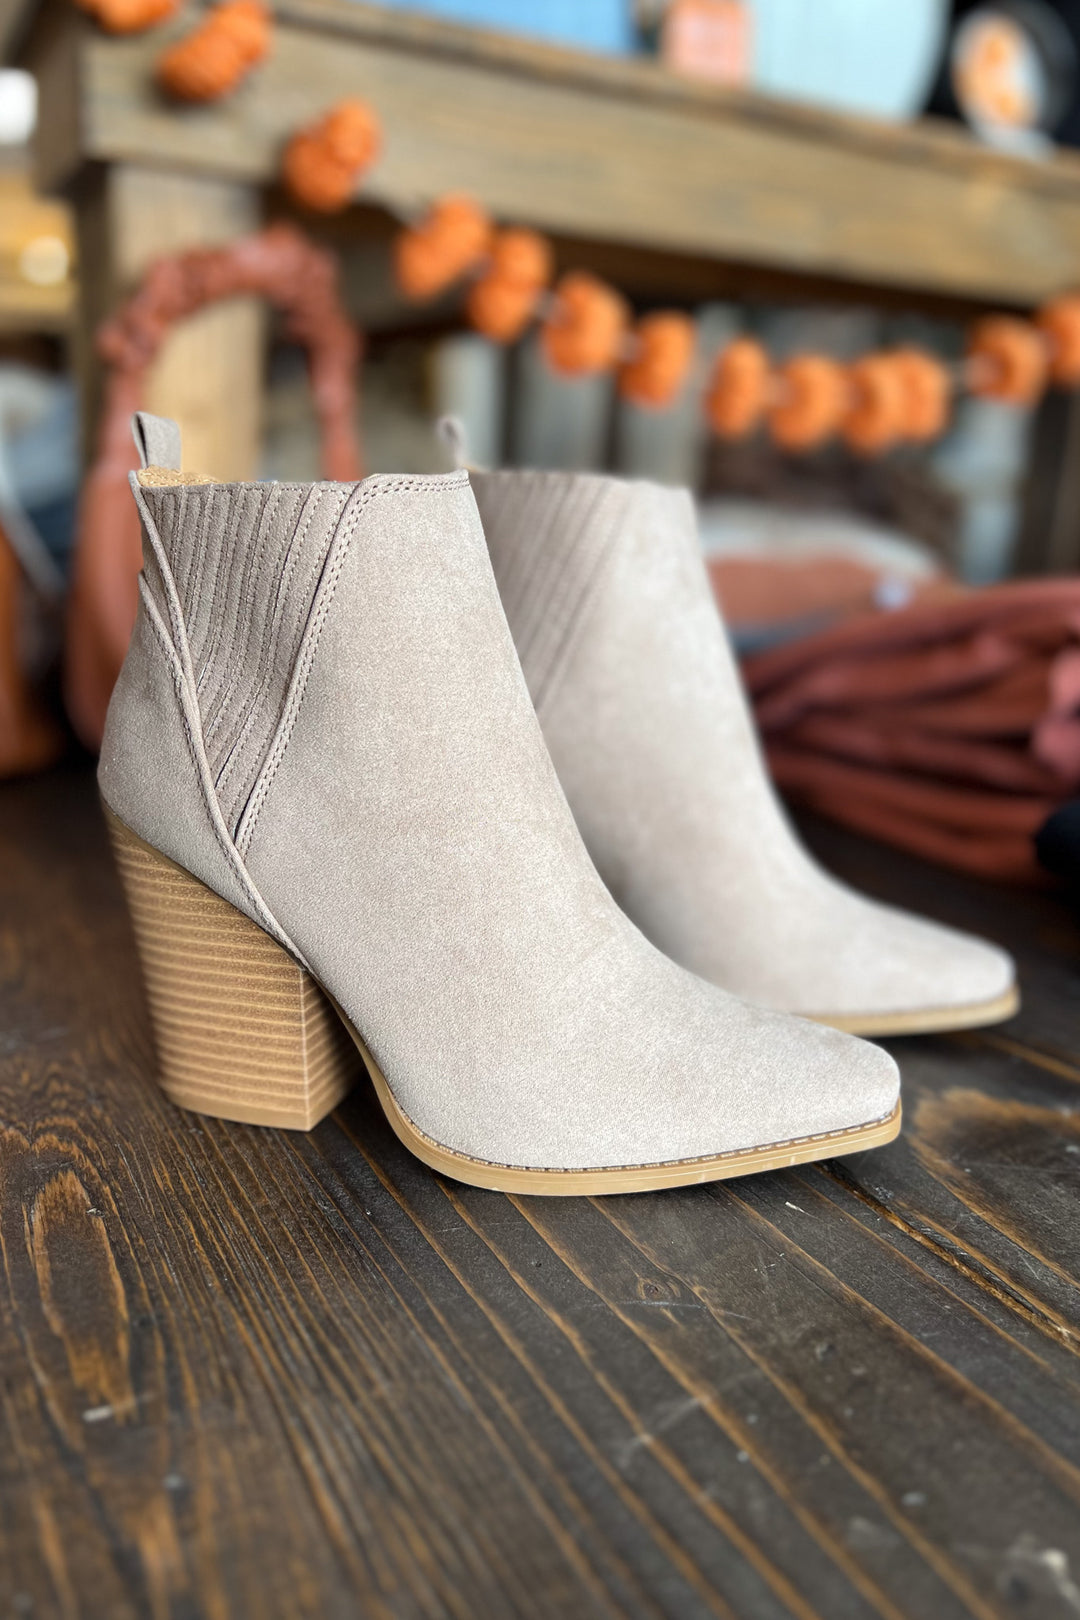 Slay Booties In Taupe - ShopSpoiled